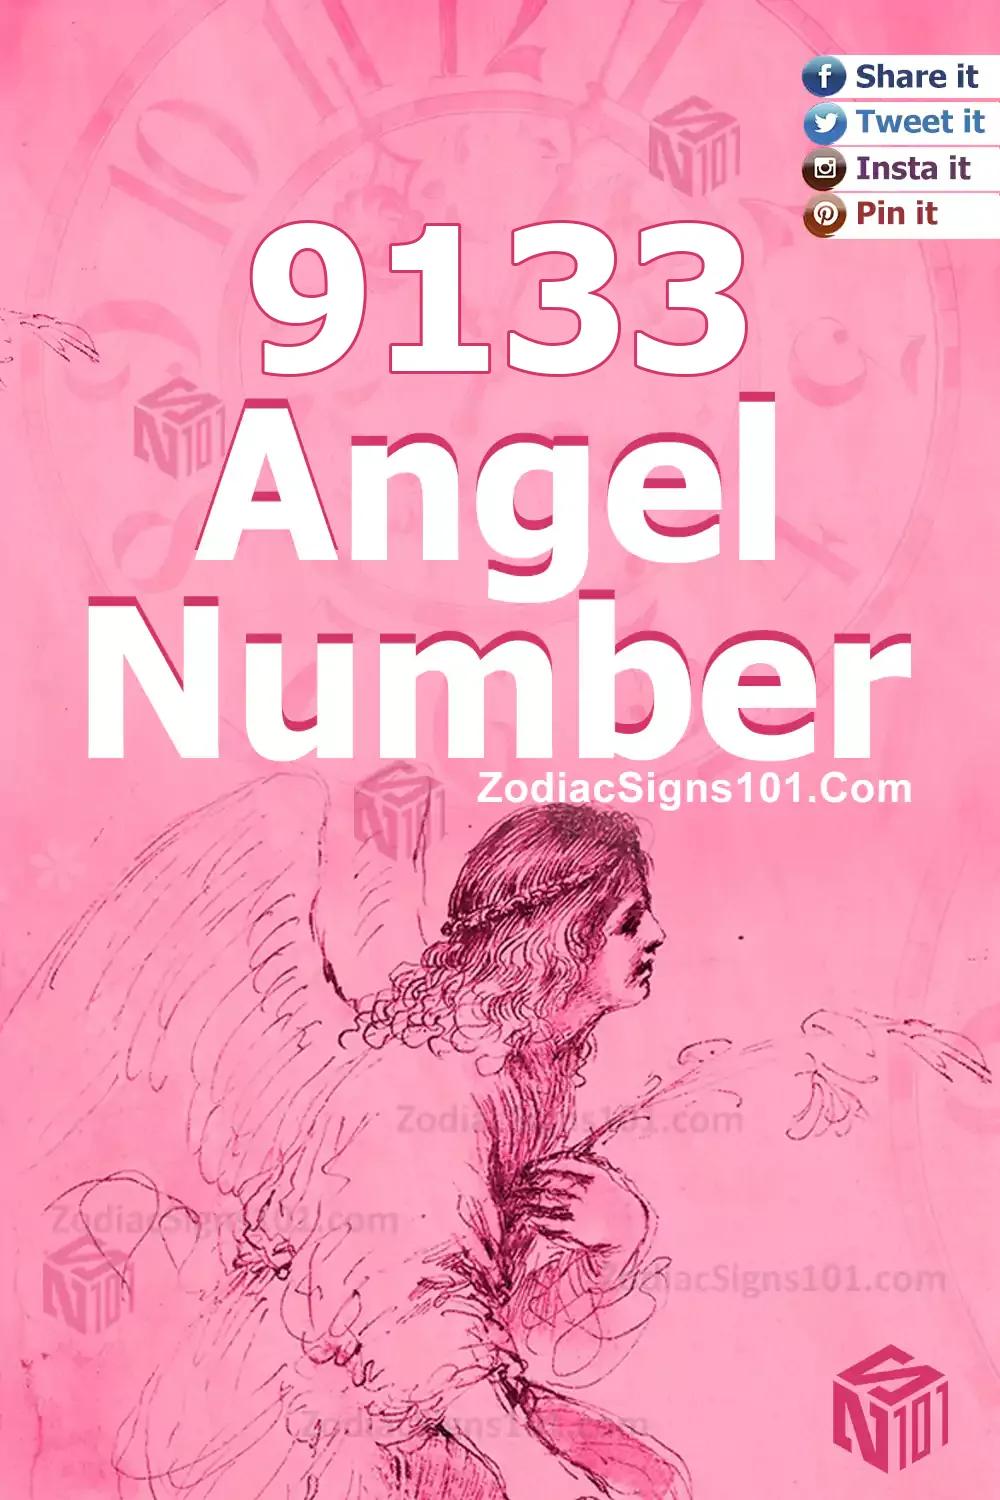 9133 Angel Number Meaning